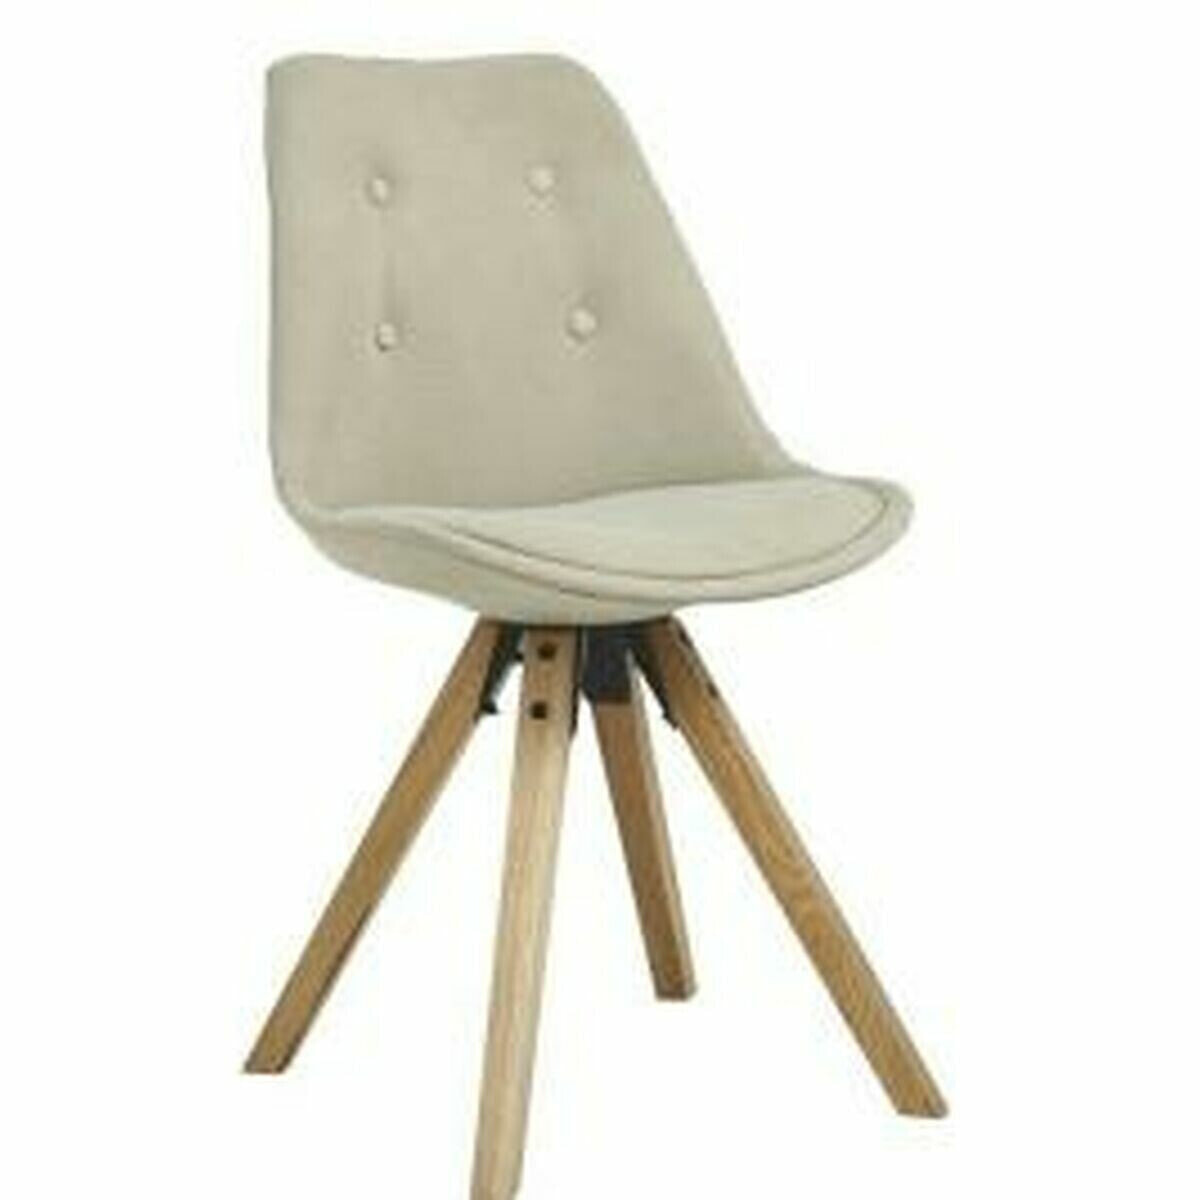 Dining Chair DKD Home Decor 48 x 44 x 84 cm Beige Brown